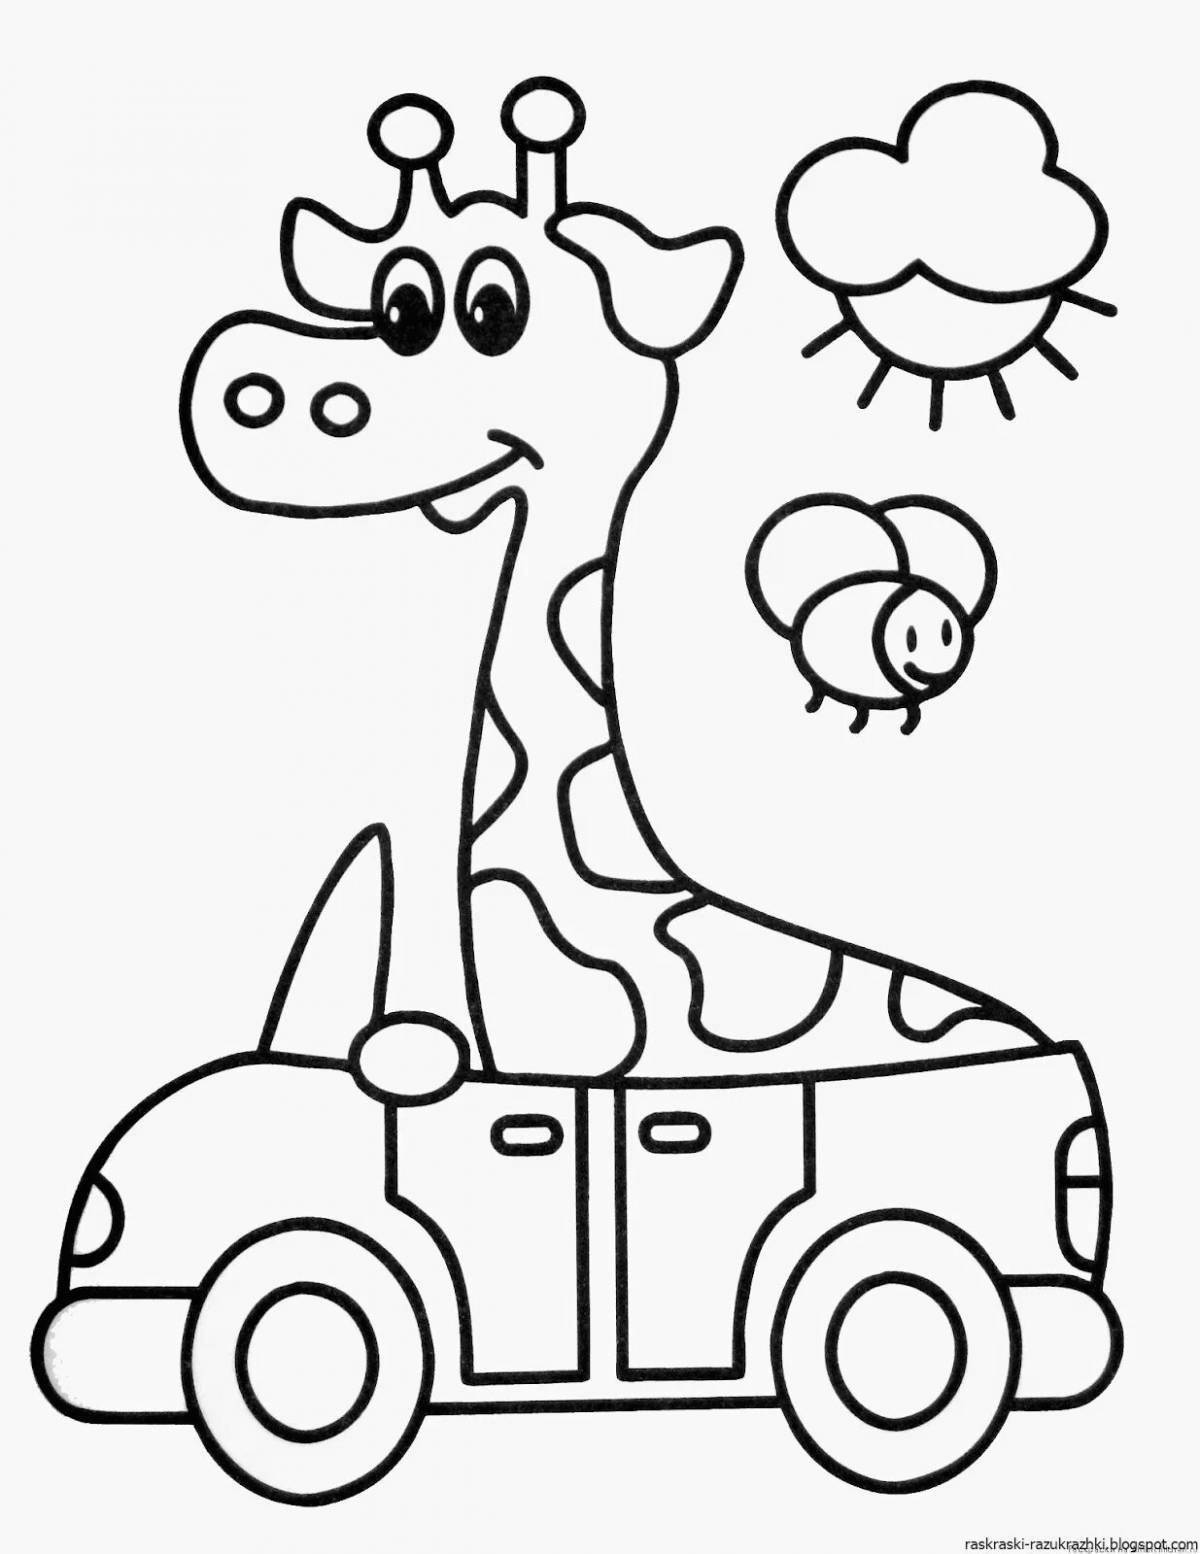 Coloring pages grand cars for 4 year olds